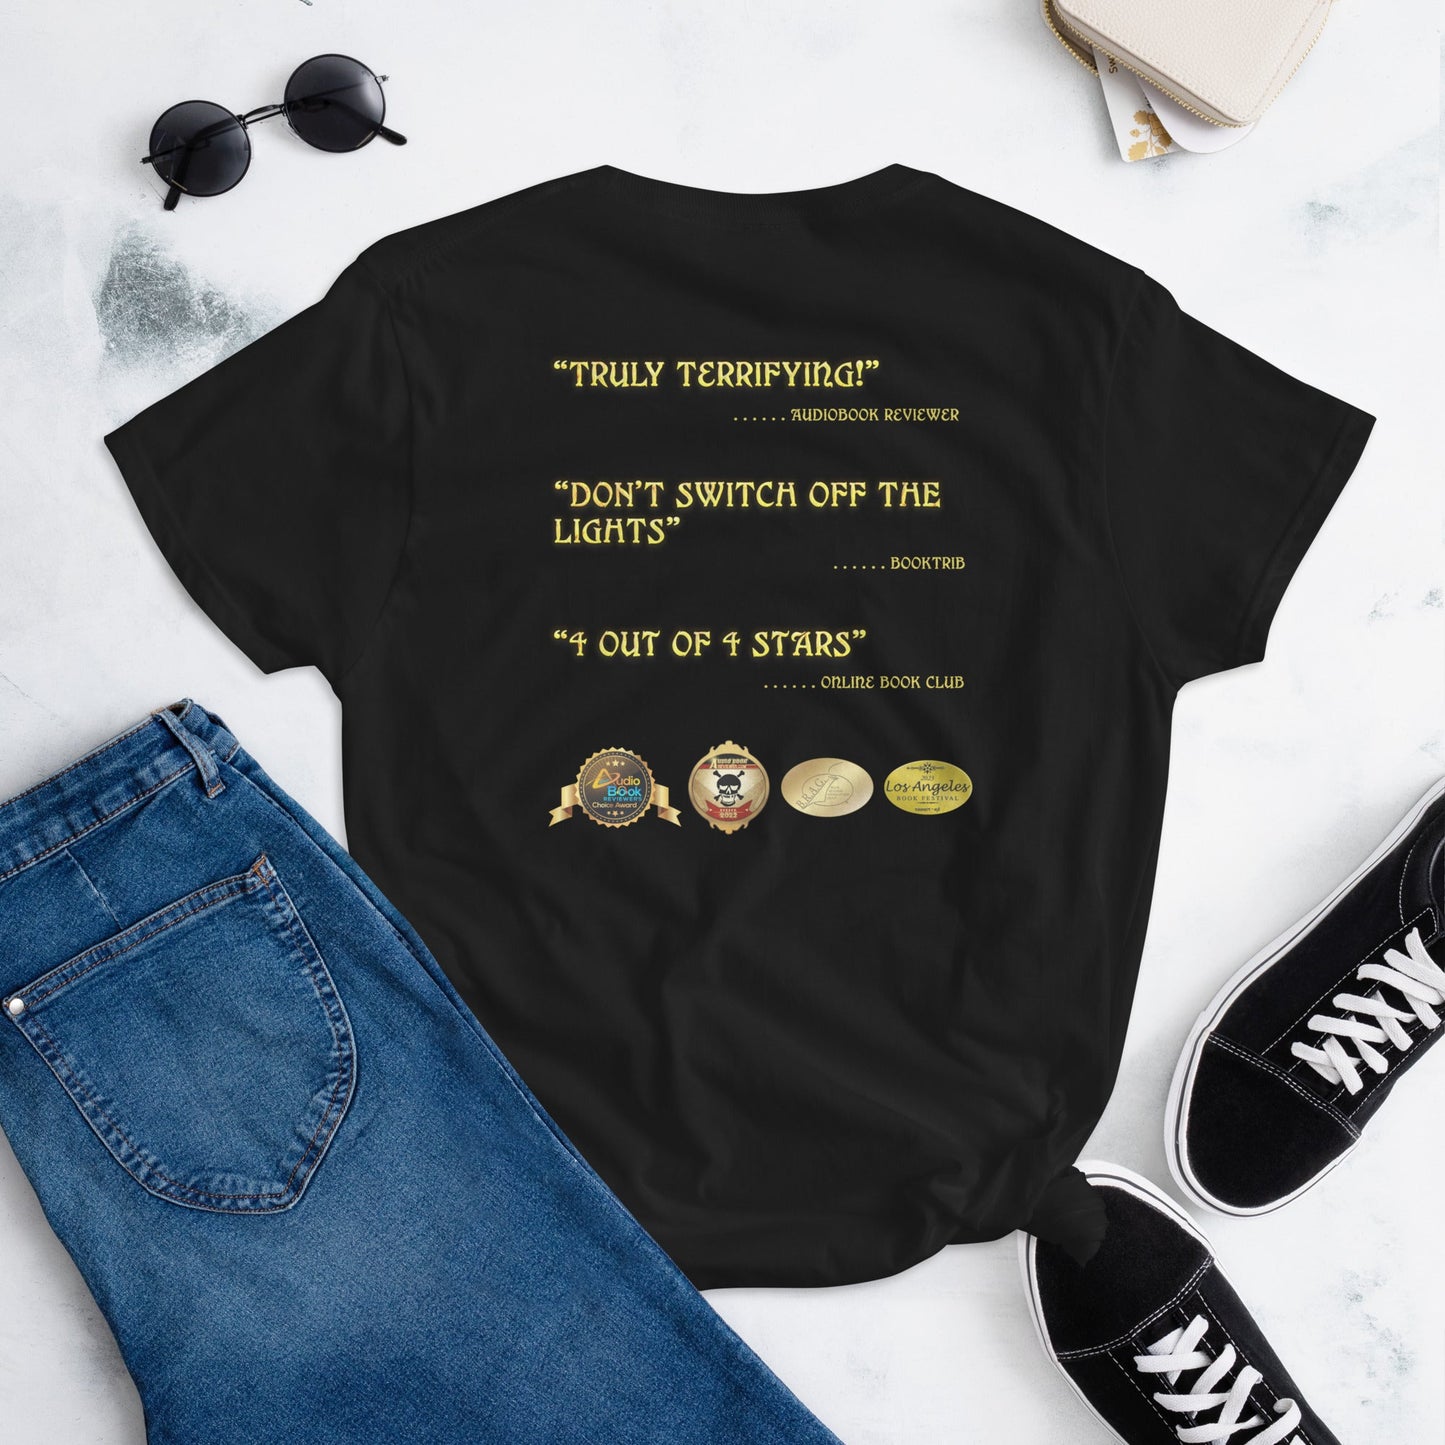 Women's Short-Sleeve Graphic T-Shirt | The Baby-Eater | Awards and Reviews - Spectral Ink Shop - Shirts & Tops -8953668_6317